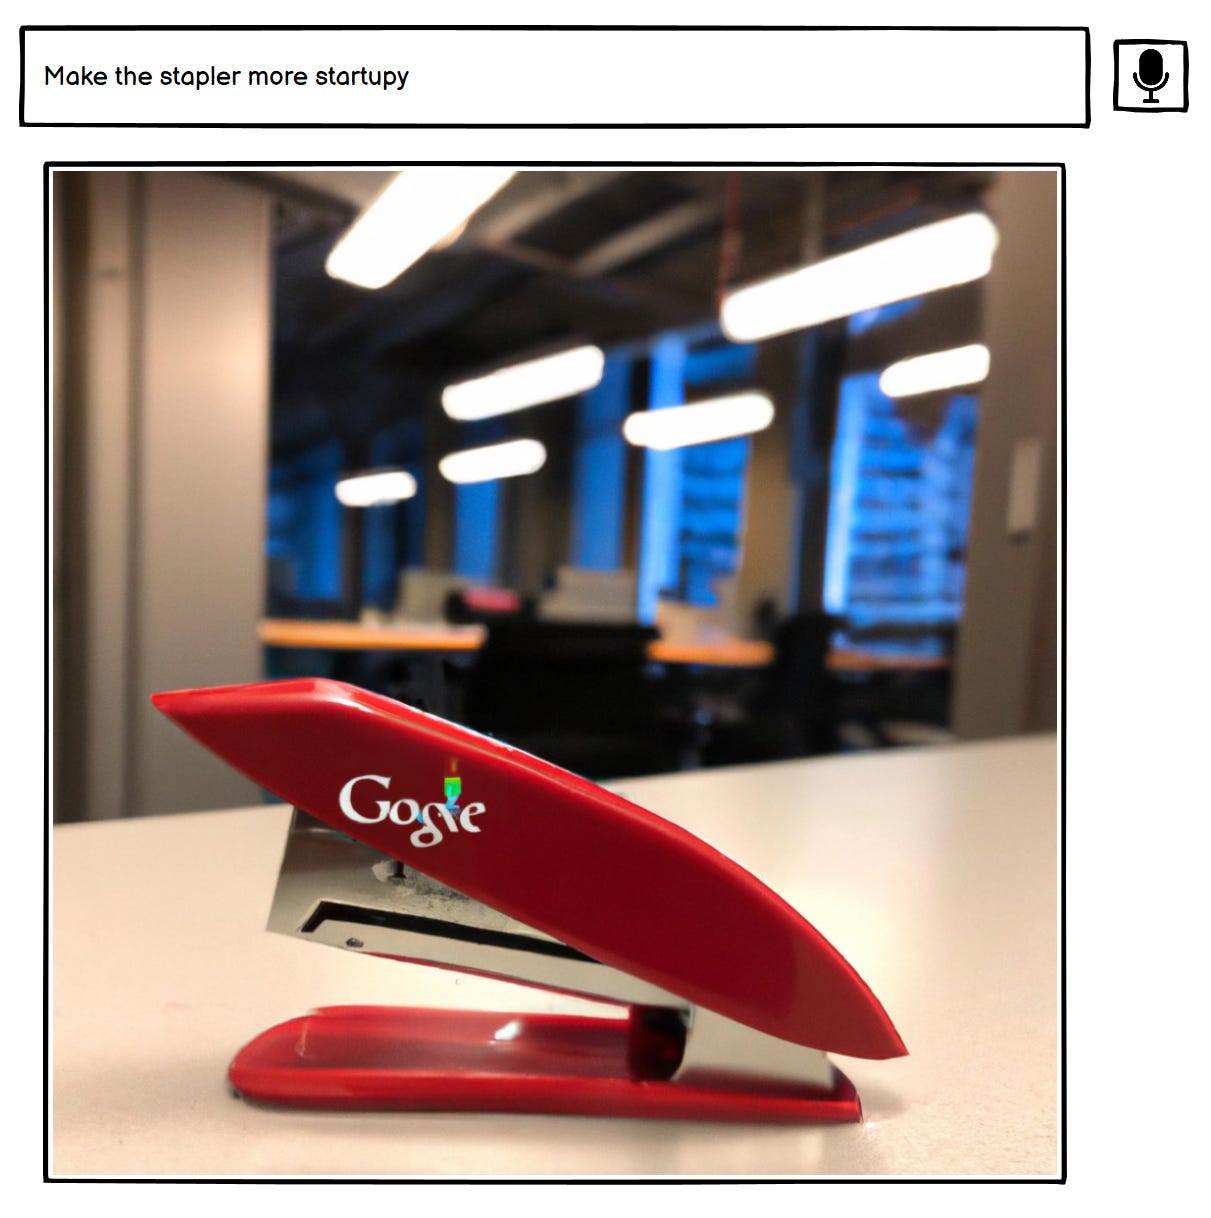 A red stapler on a table

Description automatically generated with medium confidence